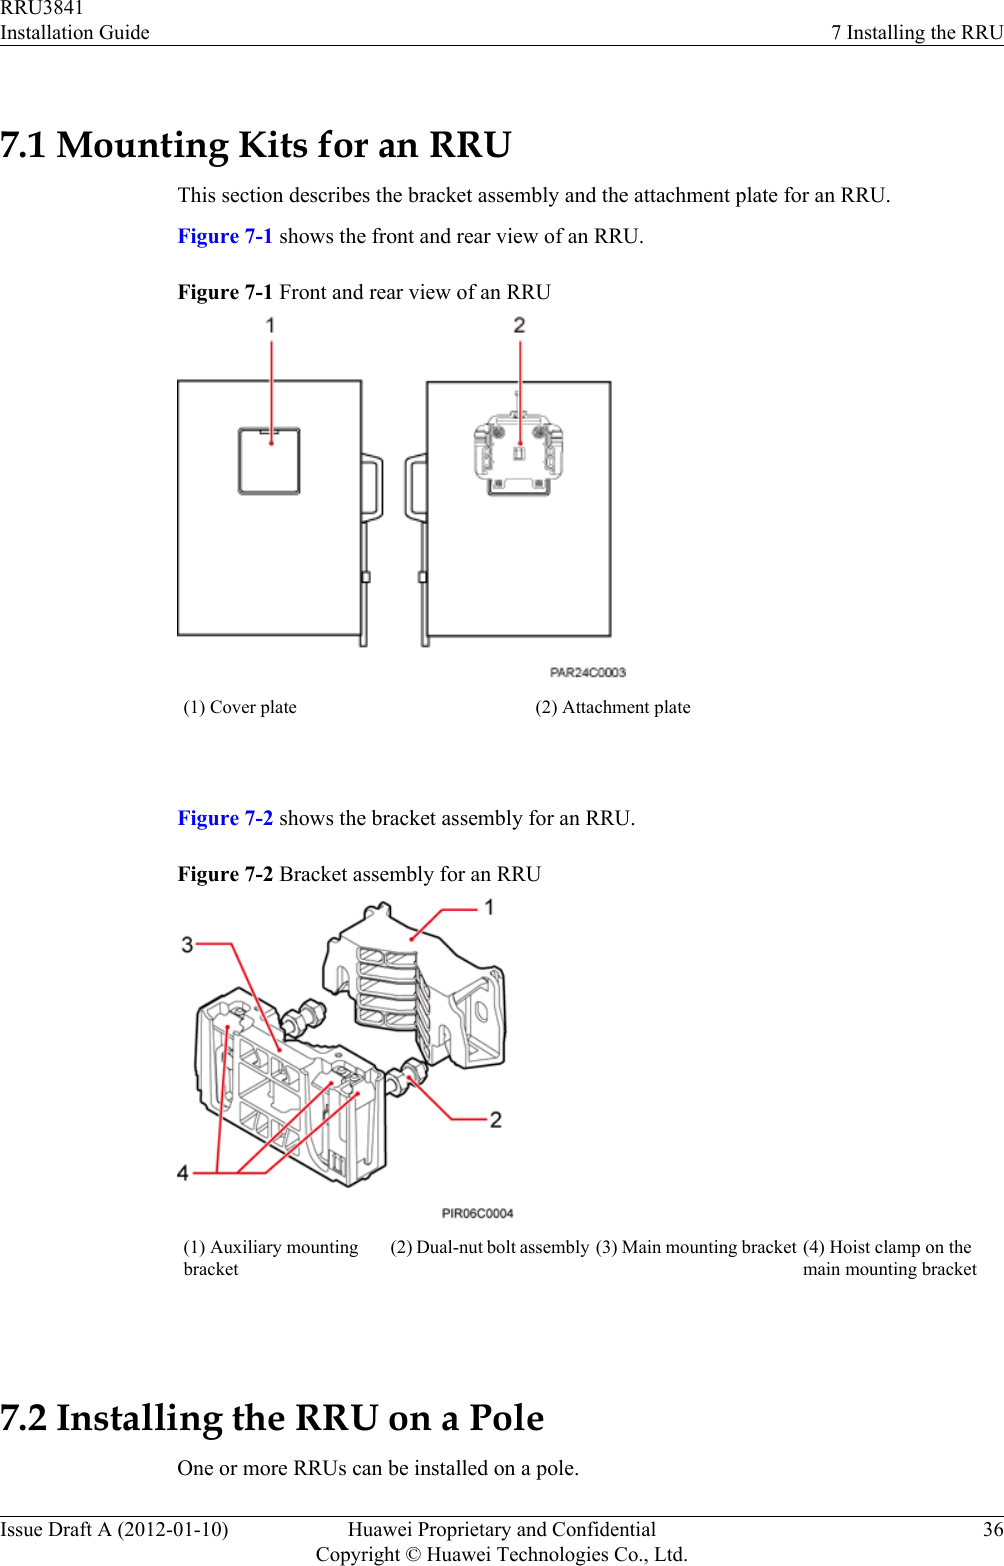 7.1 Mounting Kits for an RRUThis section describes the bracket assembly and the attachment plate for an RRU.Figure 7-1 shows the front and rear view of an RRU.Figure 7-1 Front and rear view of an RRU(1) Cover plate (2) Attachment plate Figure 7-2 shows the bracket assembly for an RRU.Figure 7-2 Bracket assembly for an RRU(1) Auxiliary mountingbracket(2) Dual-nut bolt assembly (3) Main mounting bracket (4) Hoist clamp on themain mounting bracket 7.2 Installing the RRU on a PoleOne or more RRUs can be installed on a pole.RRU3841Installation Guide 7 Installing the RRUIssue Draft A (2012-01-10) Huawei Proprietary and ConfidentialCopyright © Huawei Technologies Co., Ltd.36